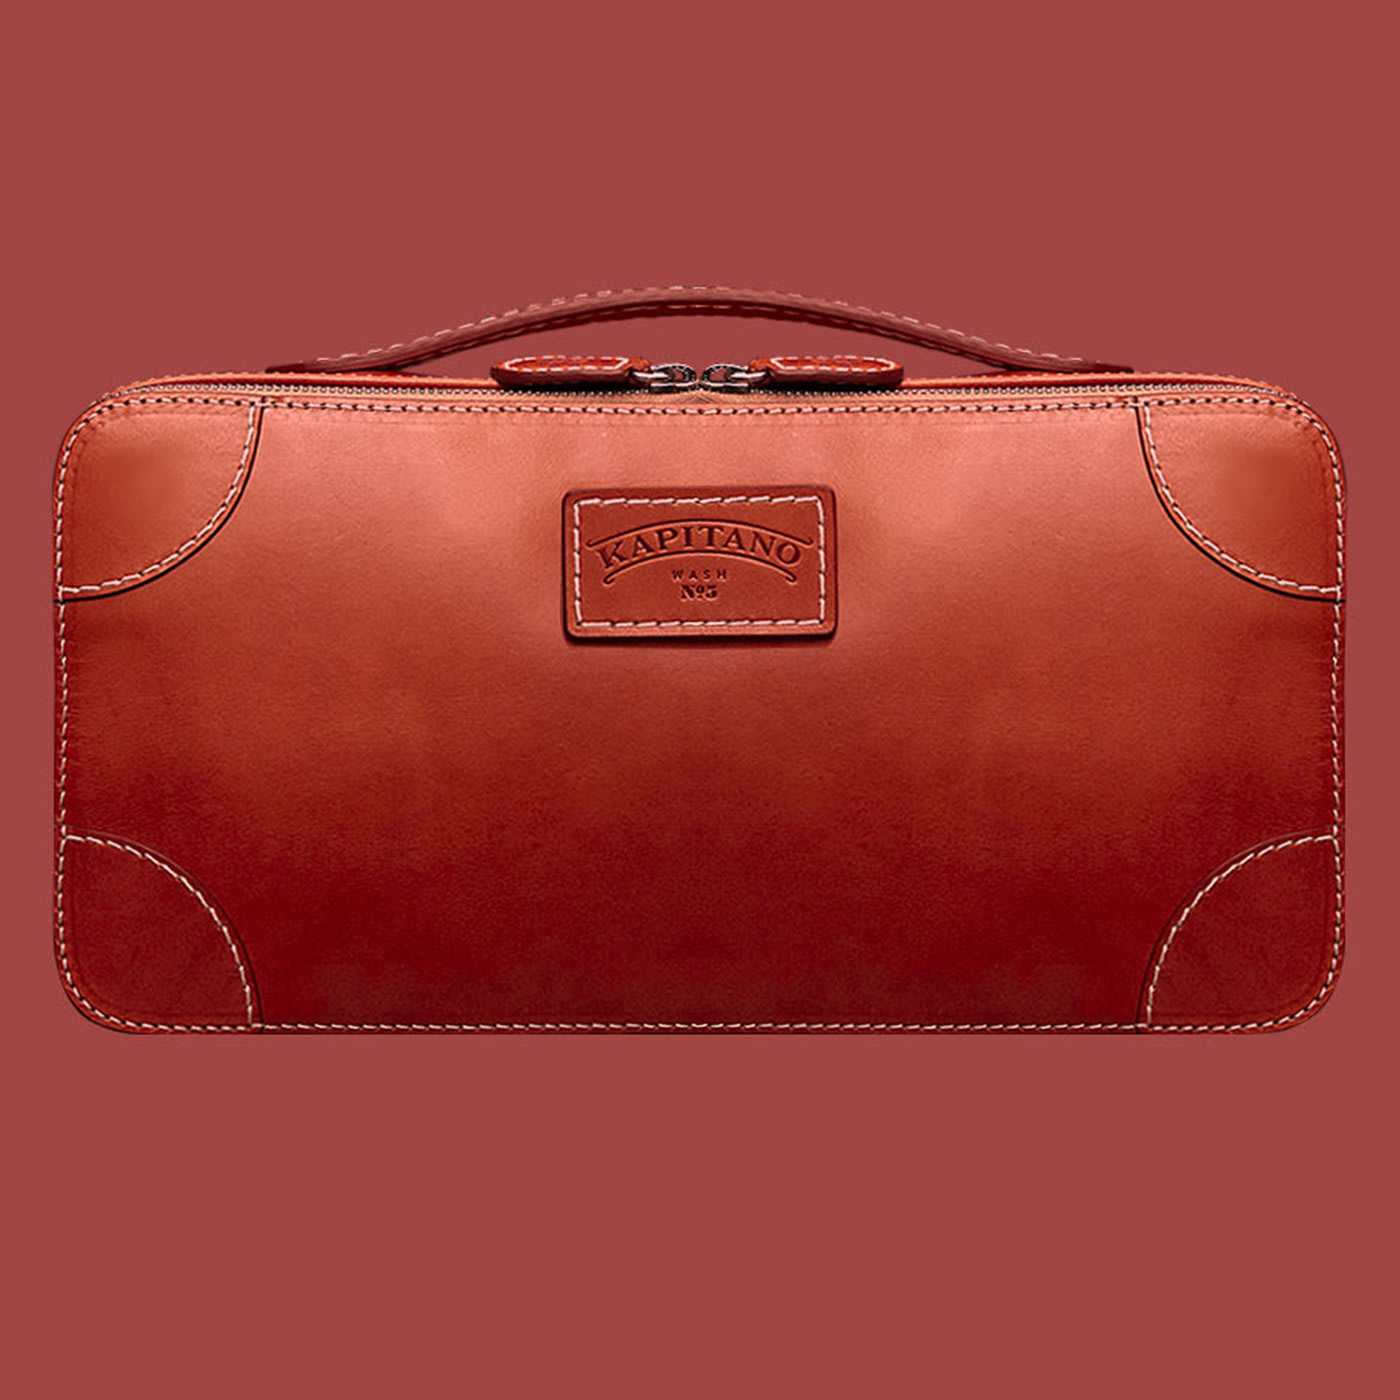 Small Shoe Bag in Red - Kapitano